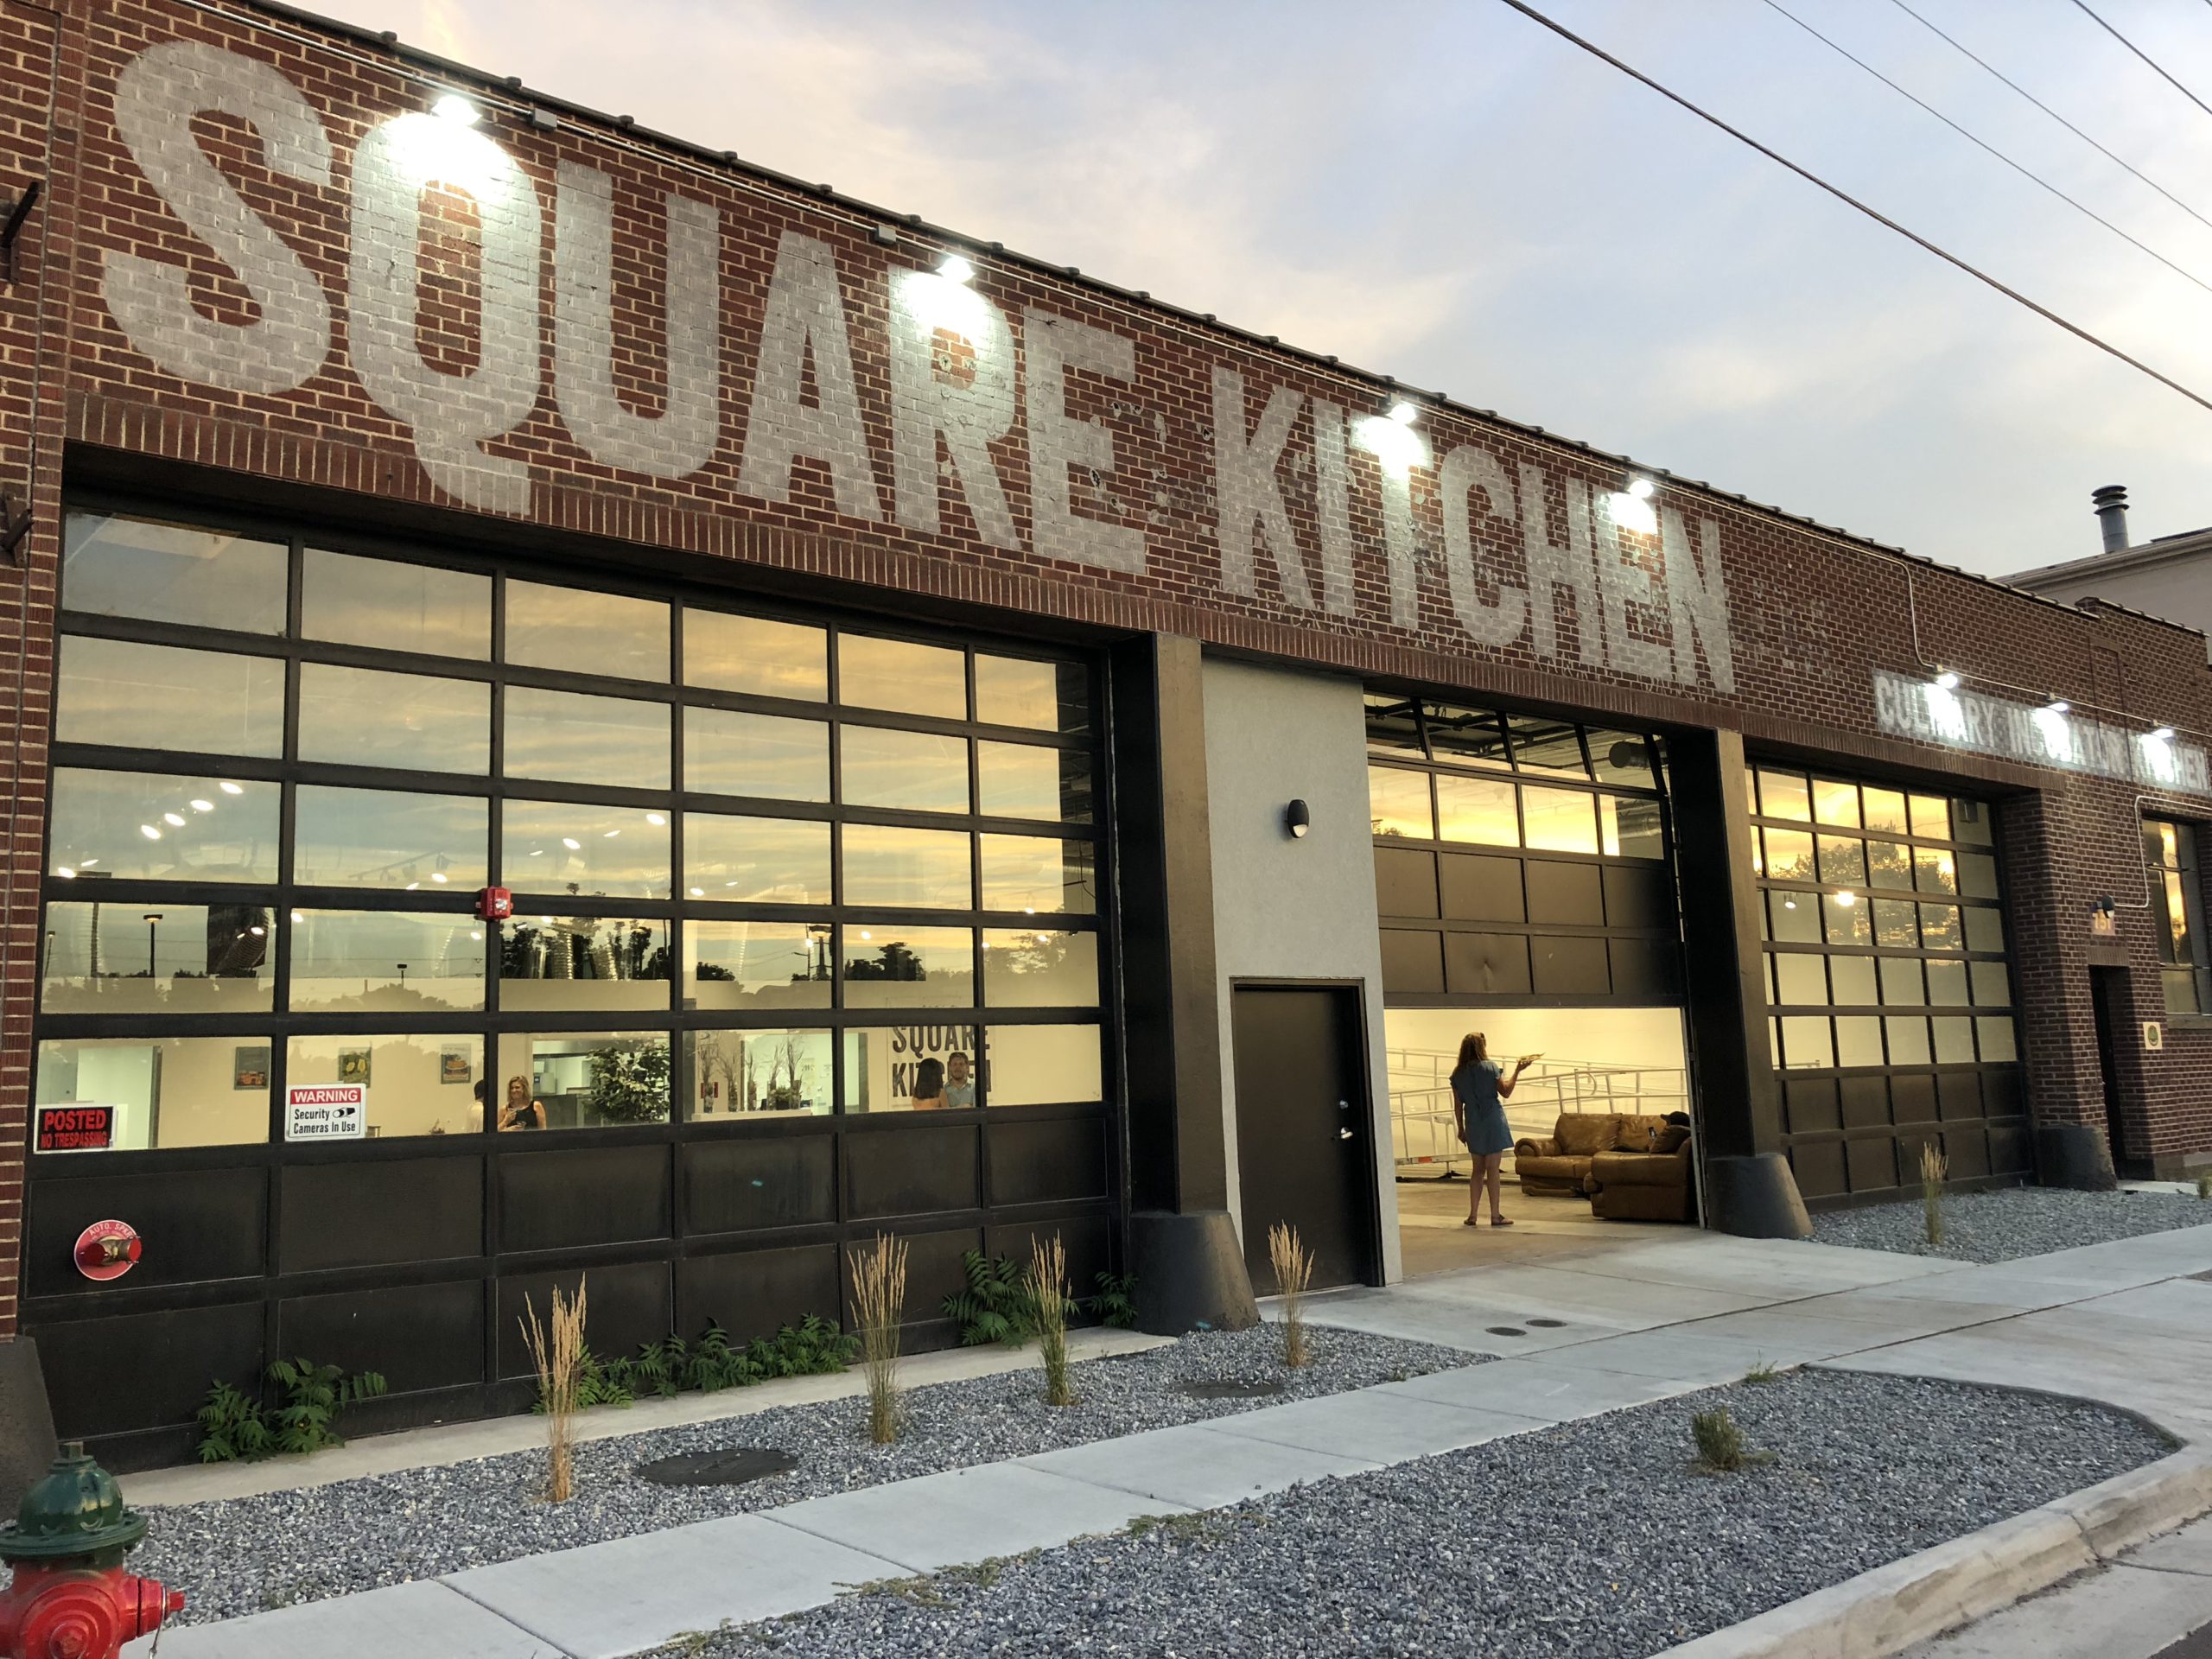 Featured image for “Square Kitchen: A Utah Business With Heart”